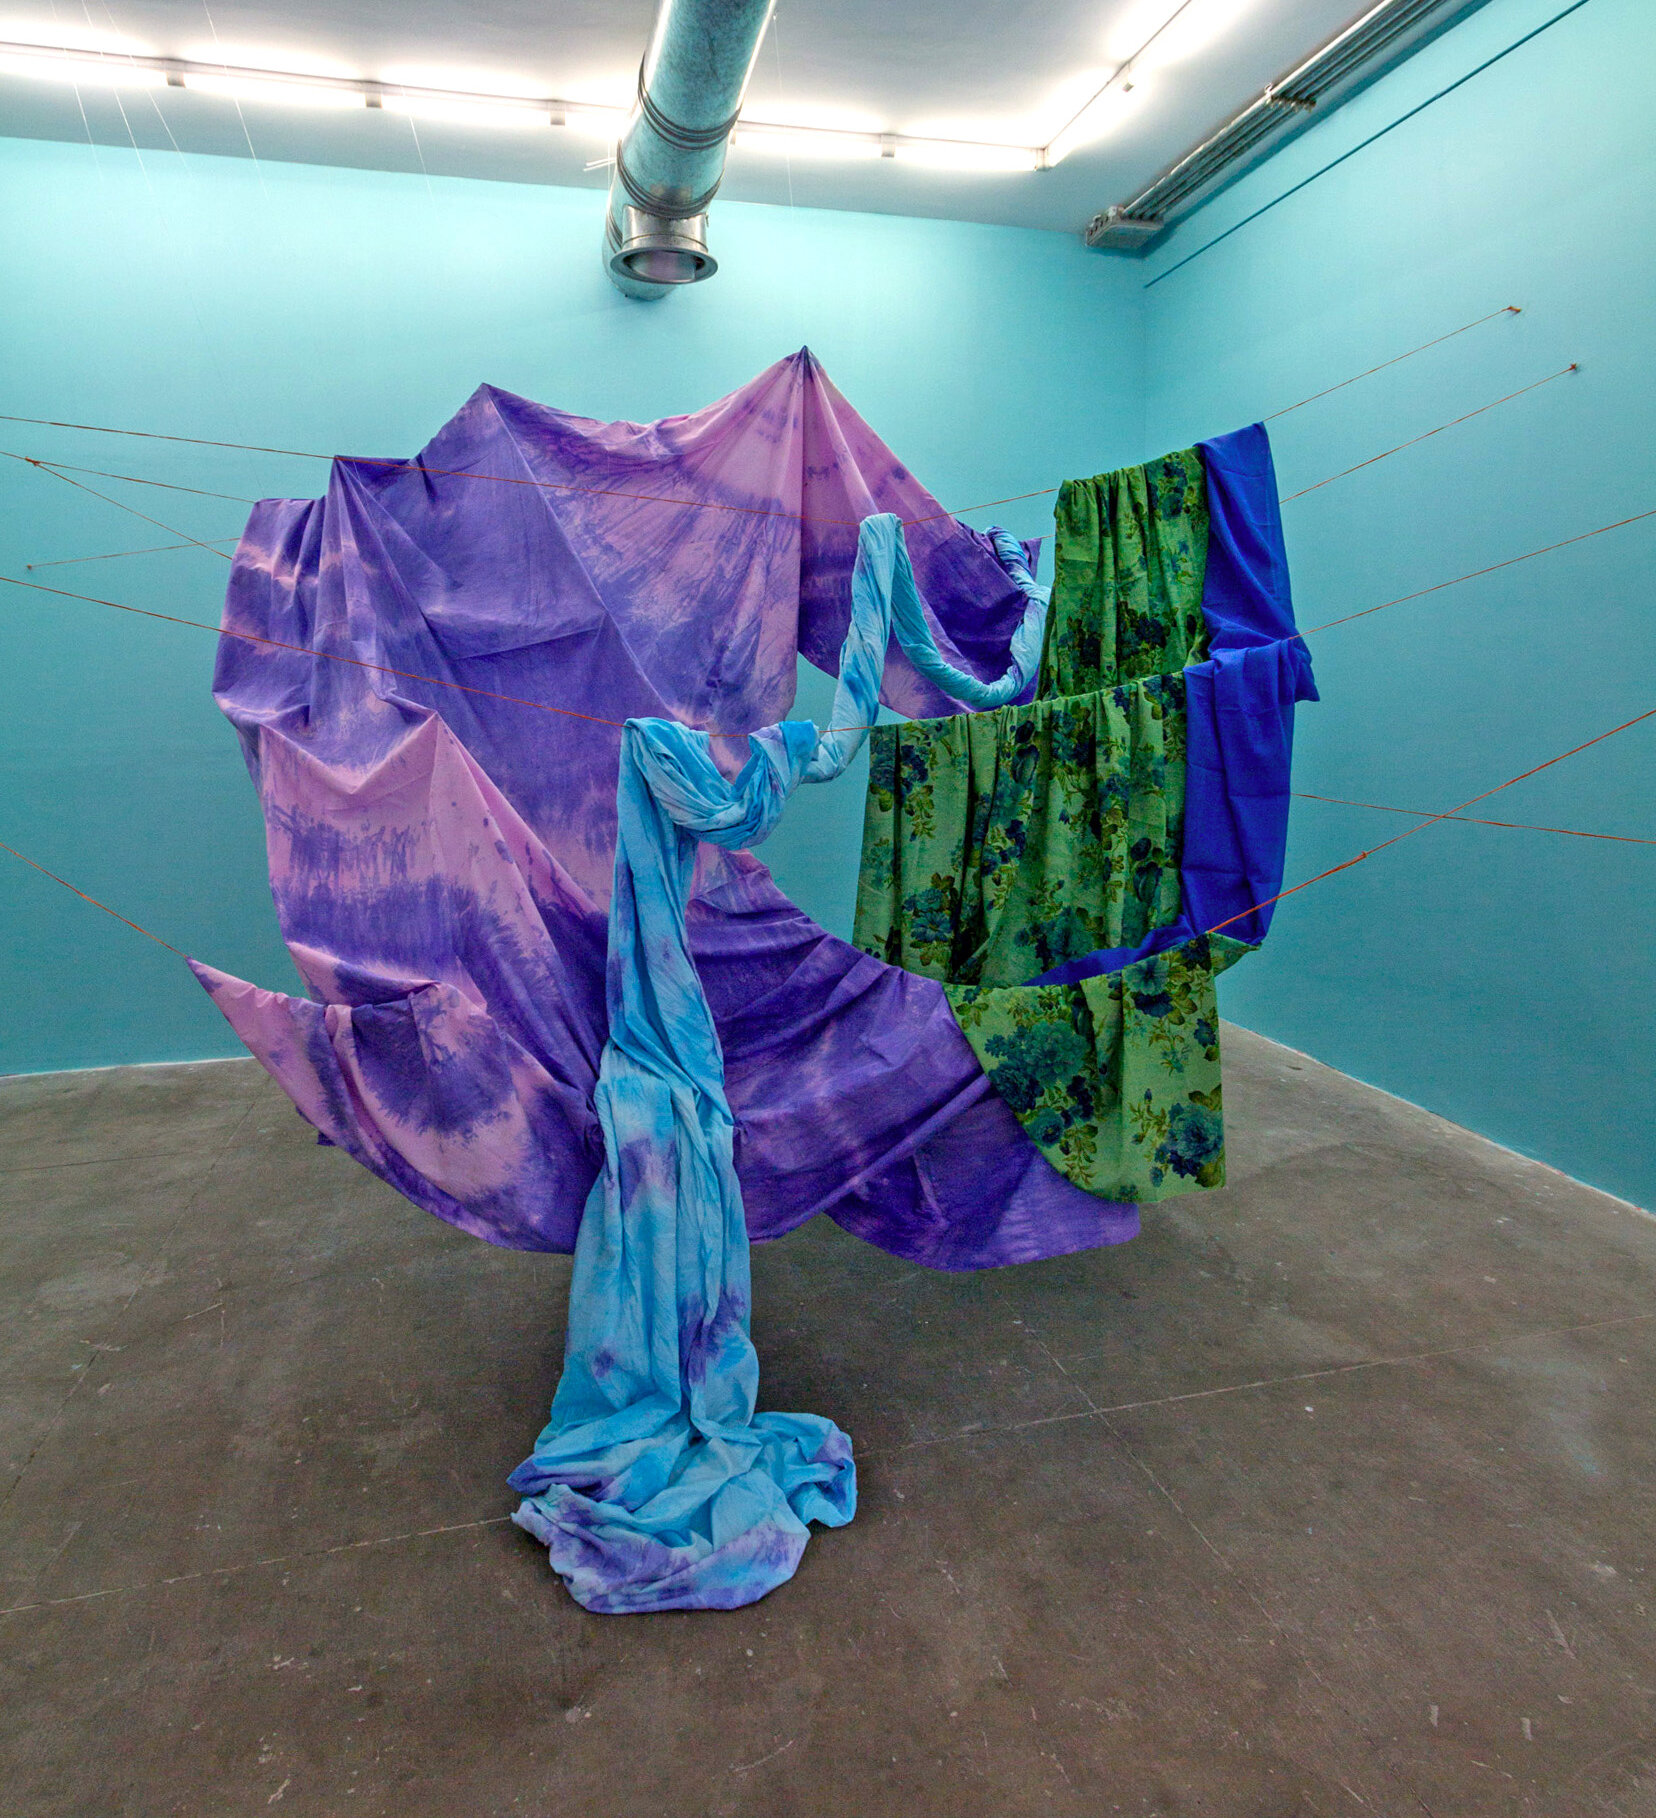 Suspended Mountain, hand dyed cotton cloth, found cloth, installation view: Electric room, Dastan Gallery, Tehran, Iran 2017